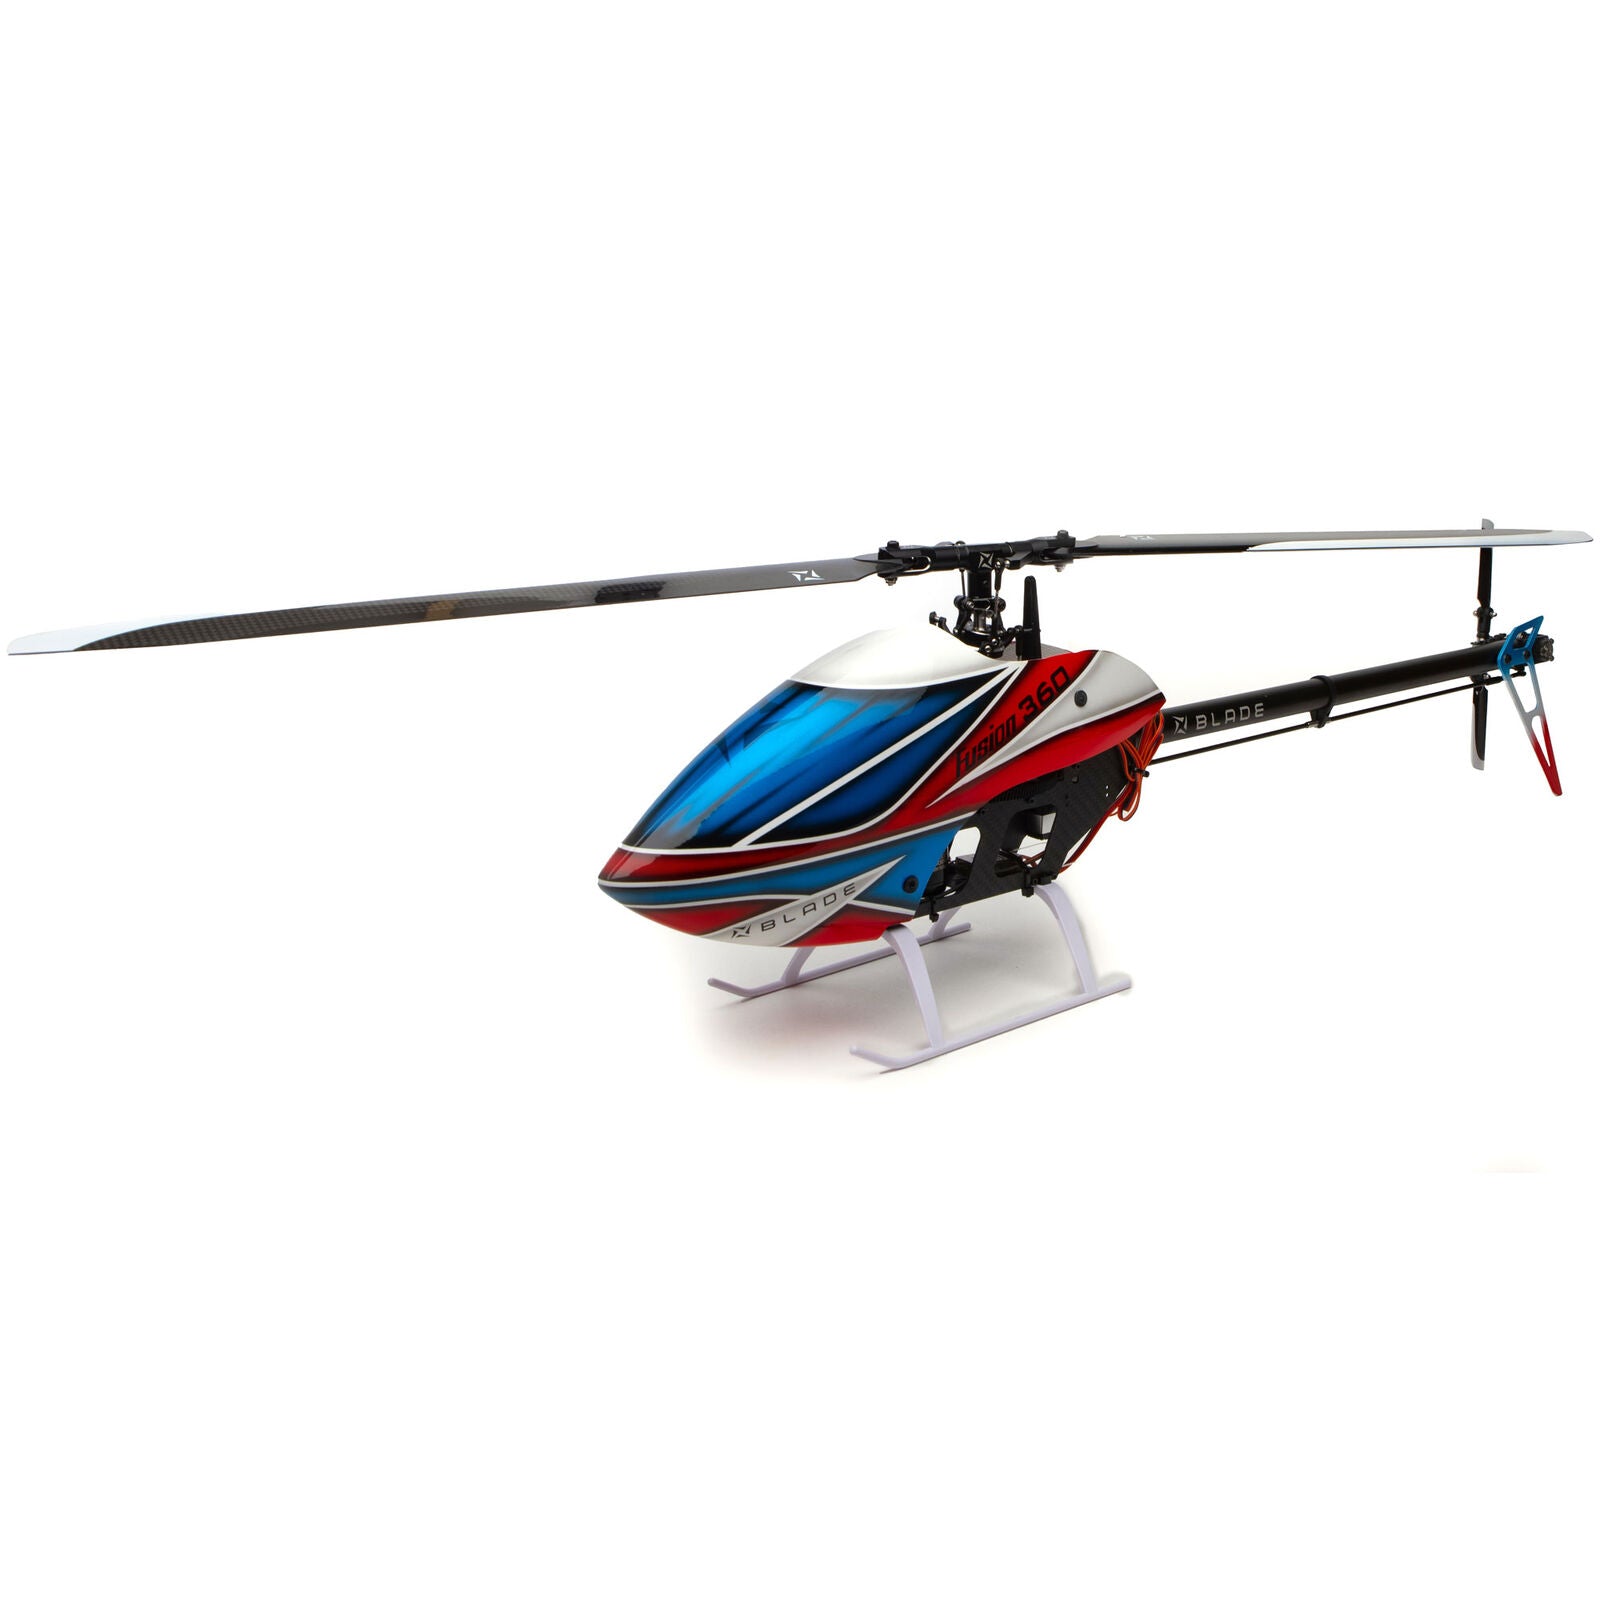 EFLITE BLADE BLH6150 Fusion 360 Smart BNF Basic with SAFE